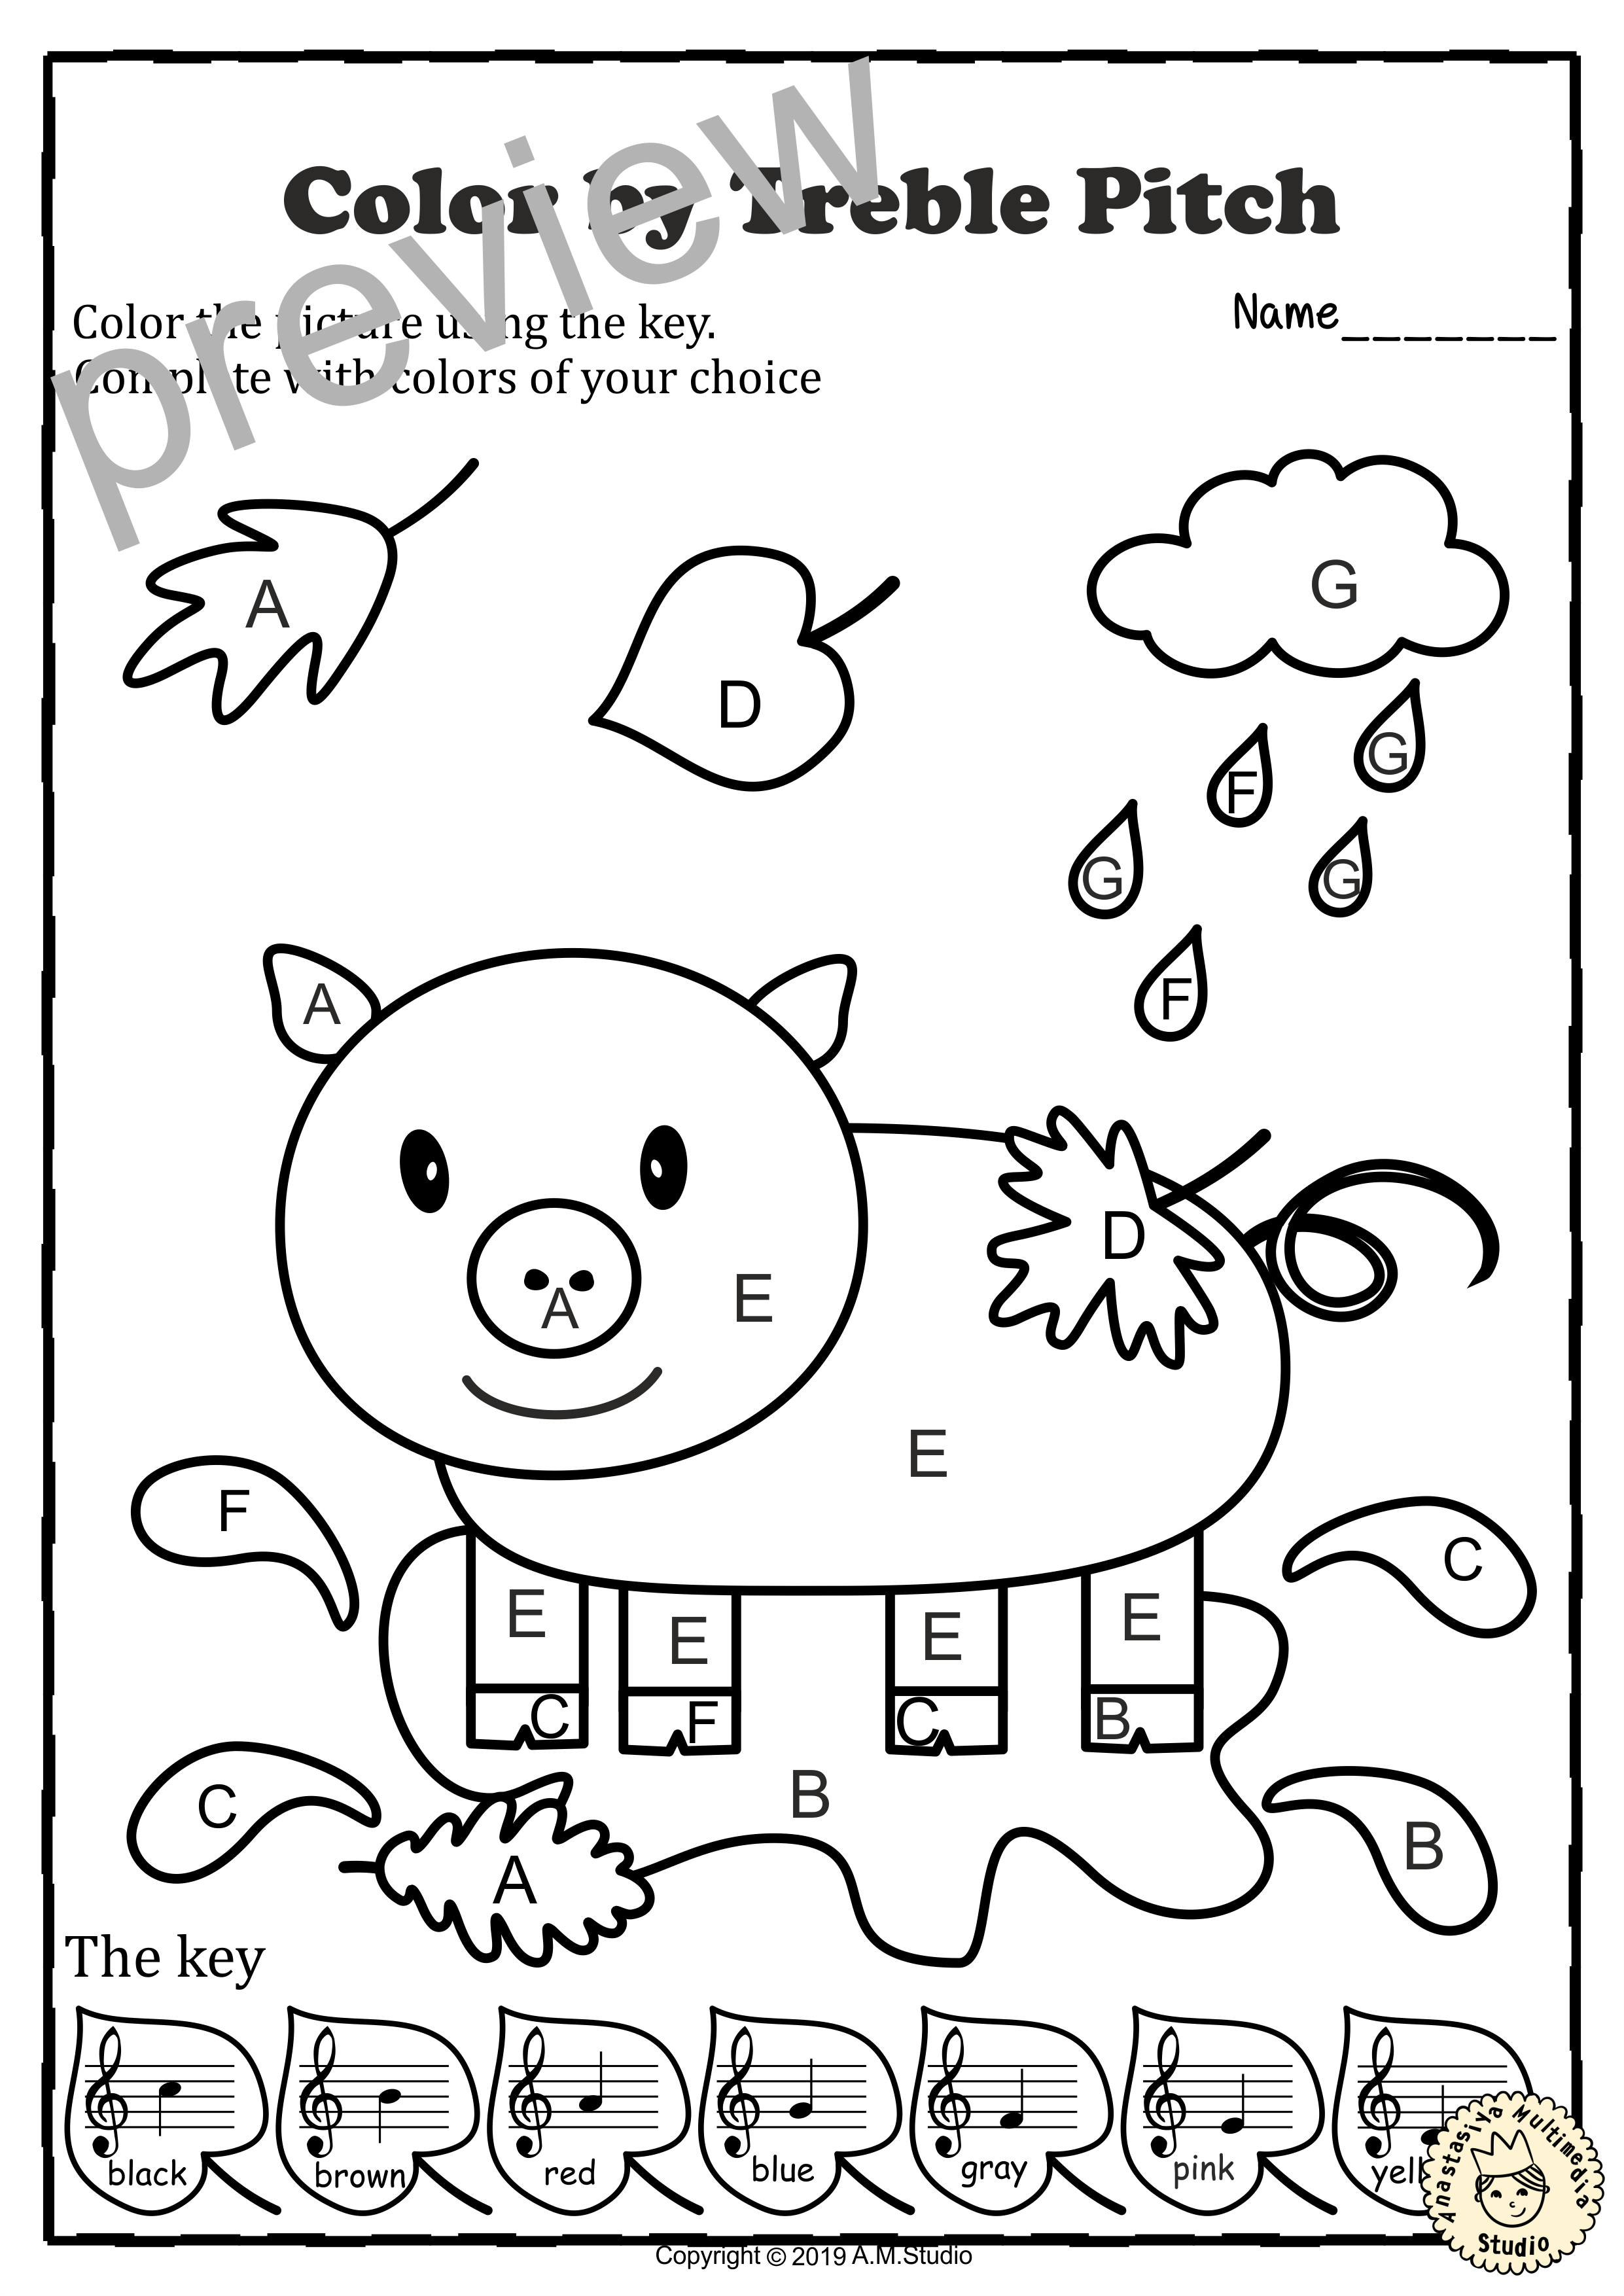 Musical Coloring Pages for Fall {Color by Treble Pitch} with answers (img # 3)